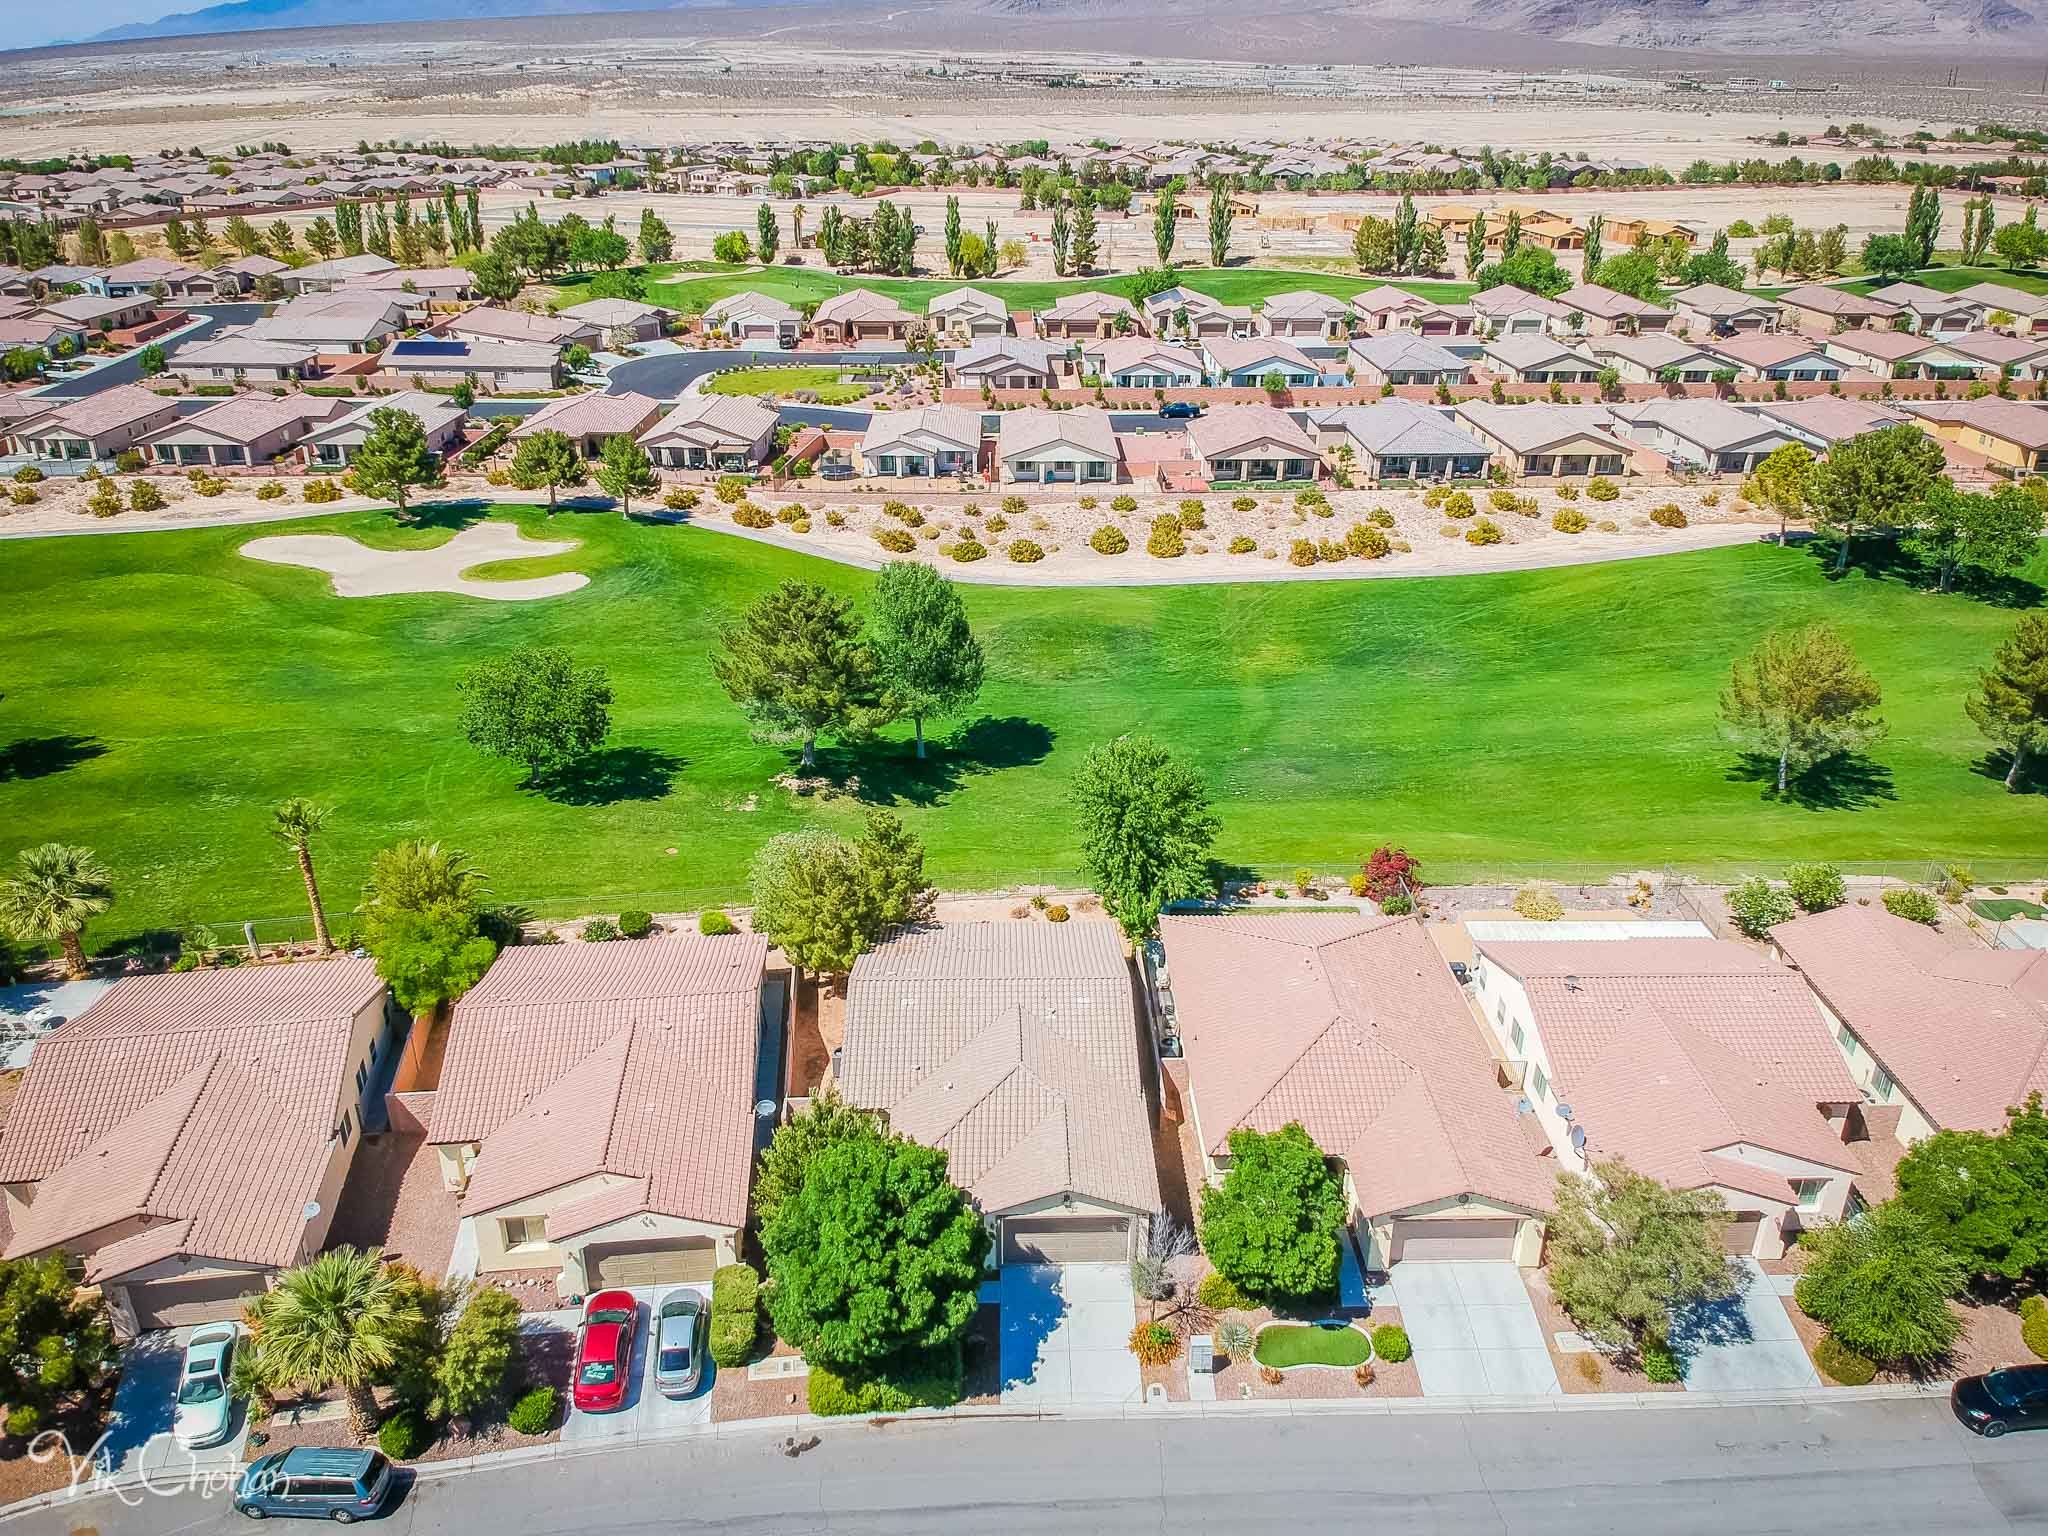 2022-05-15-5378-E-Cansano-St-Pahrump-Real-Estate-Photography-Virtual-Tour-Drone-Photography-Vik-Chohan-Photography-Photo-Booth-Social-Media-VCP-125.jpg